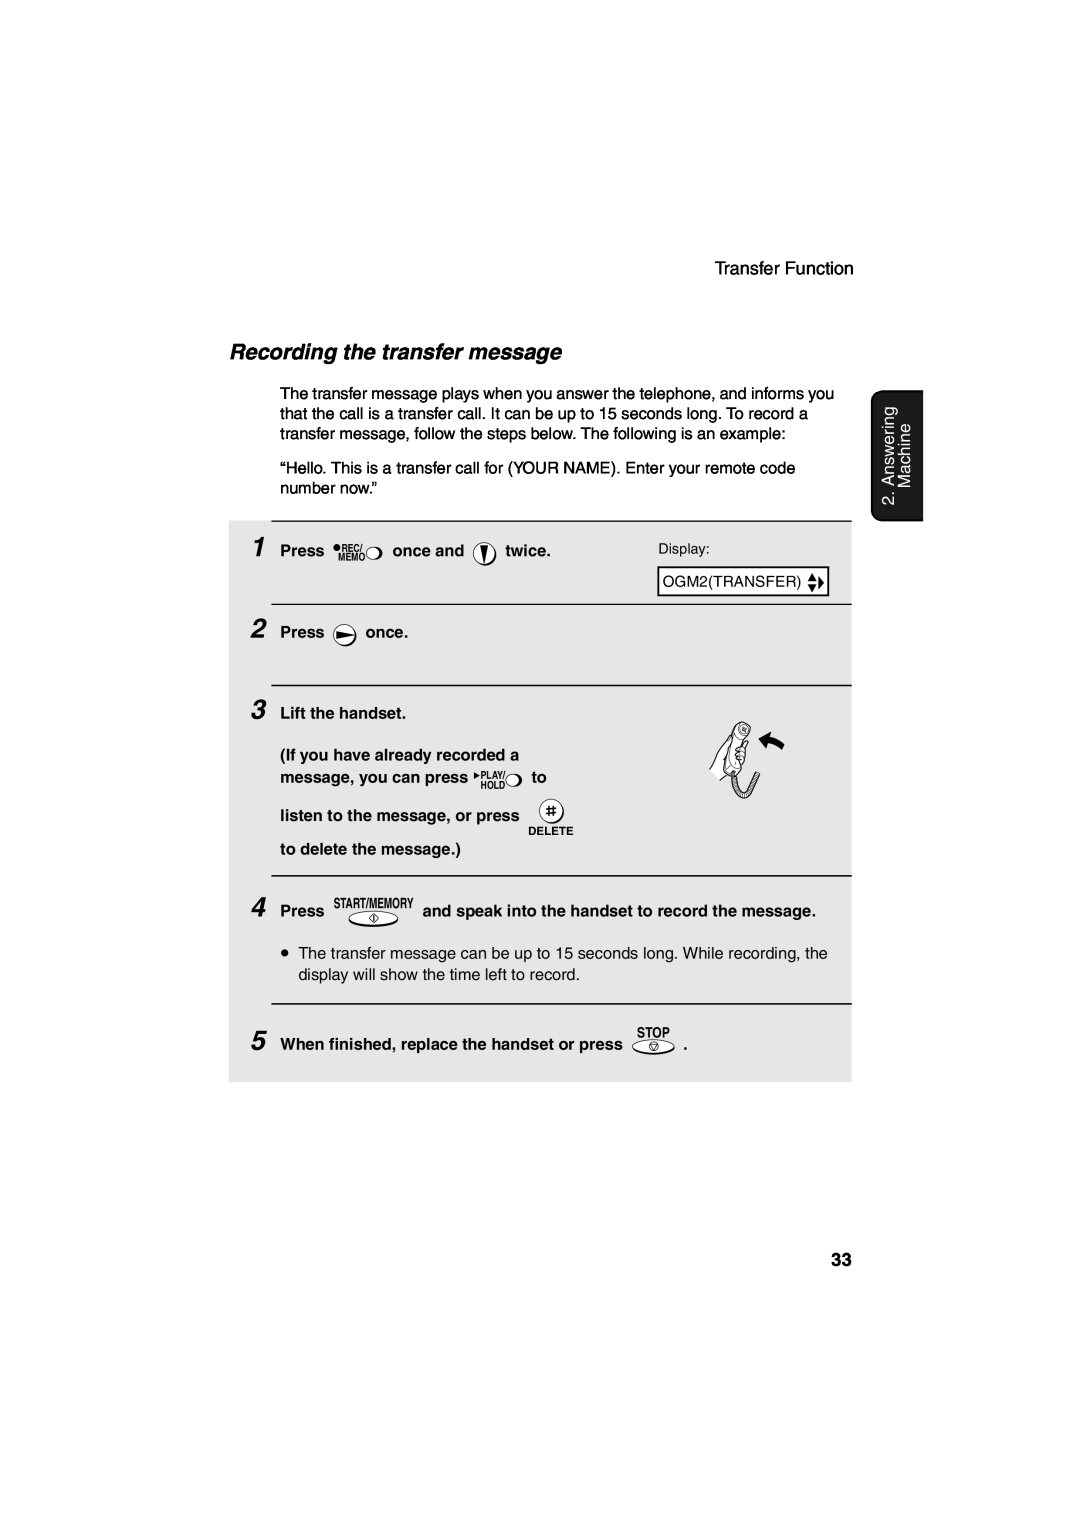 Sharp UX-A260 manual Recording the transfer message, Answering, Machine, OGM2TRANSFER 